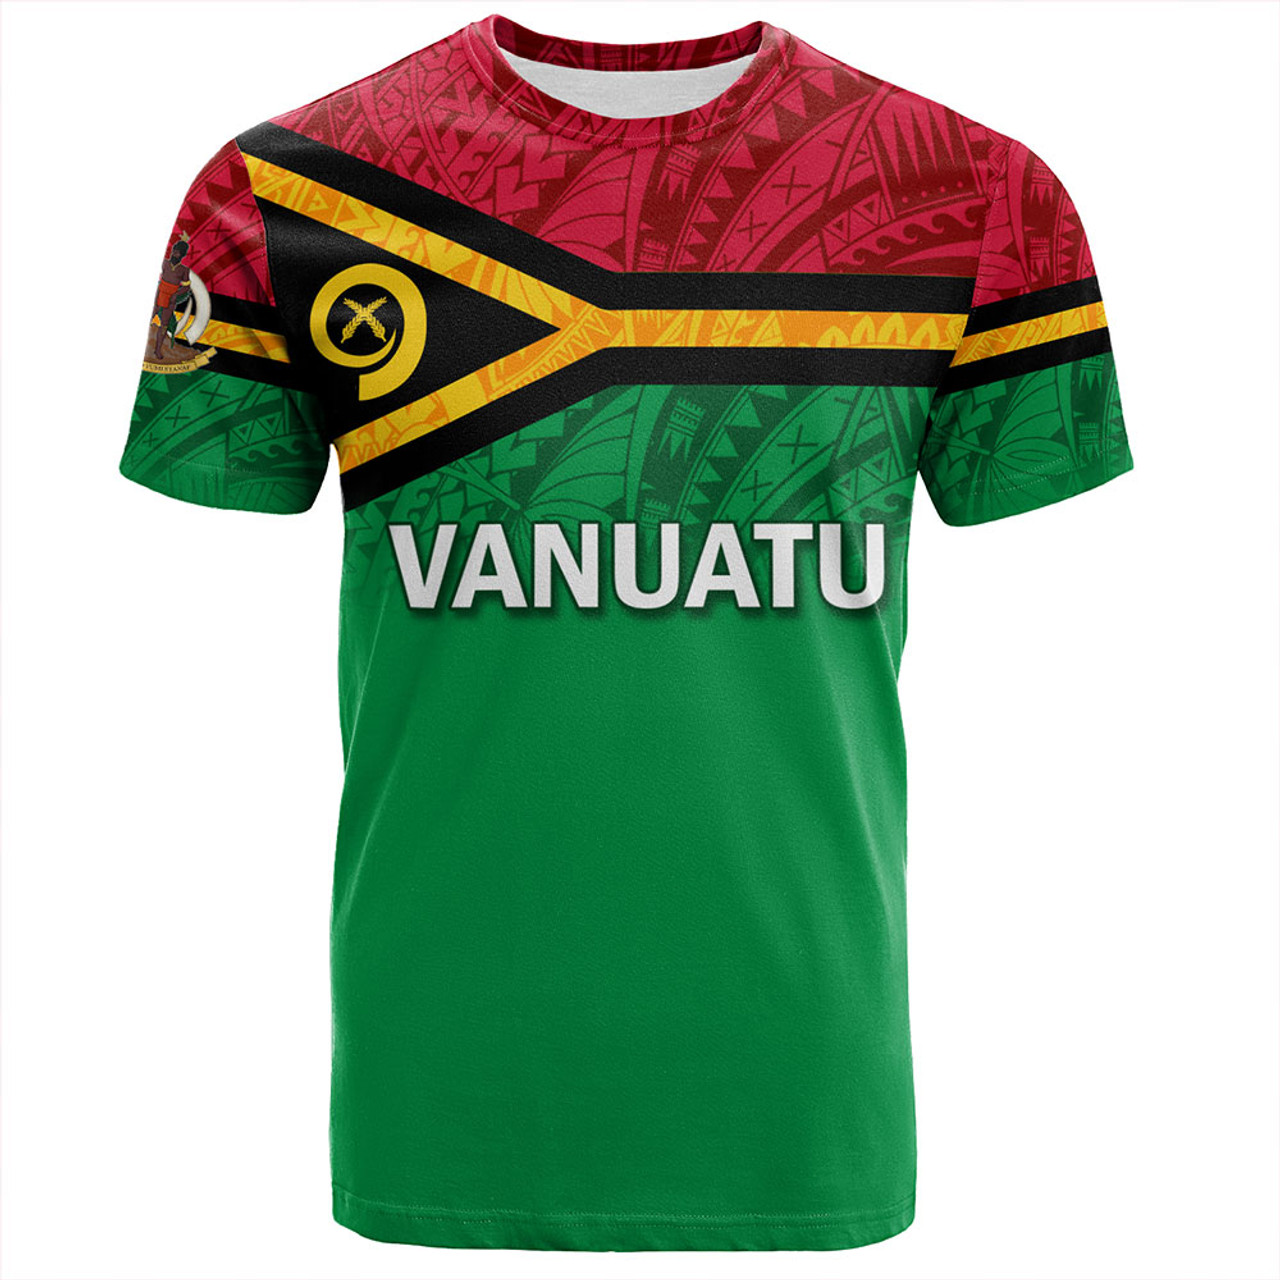 Vanuatu T-Shirt - Flag Color With Traditional Patterns